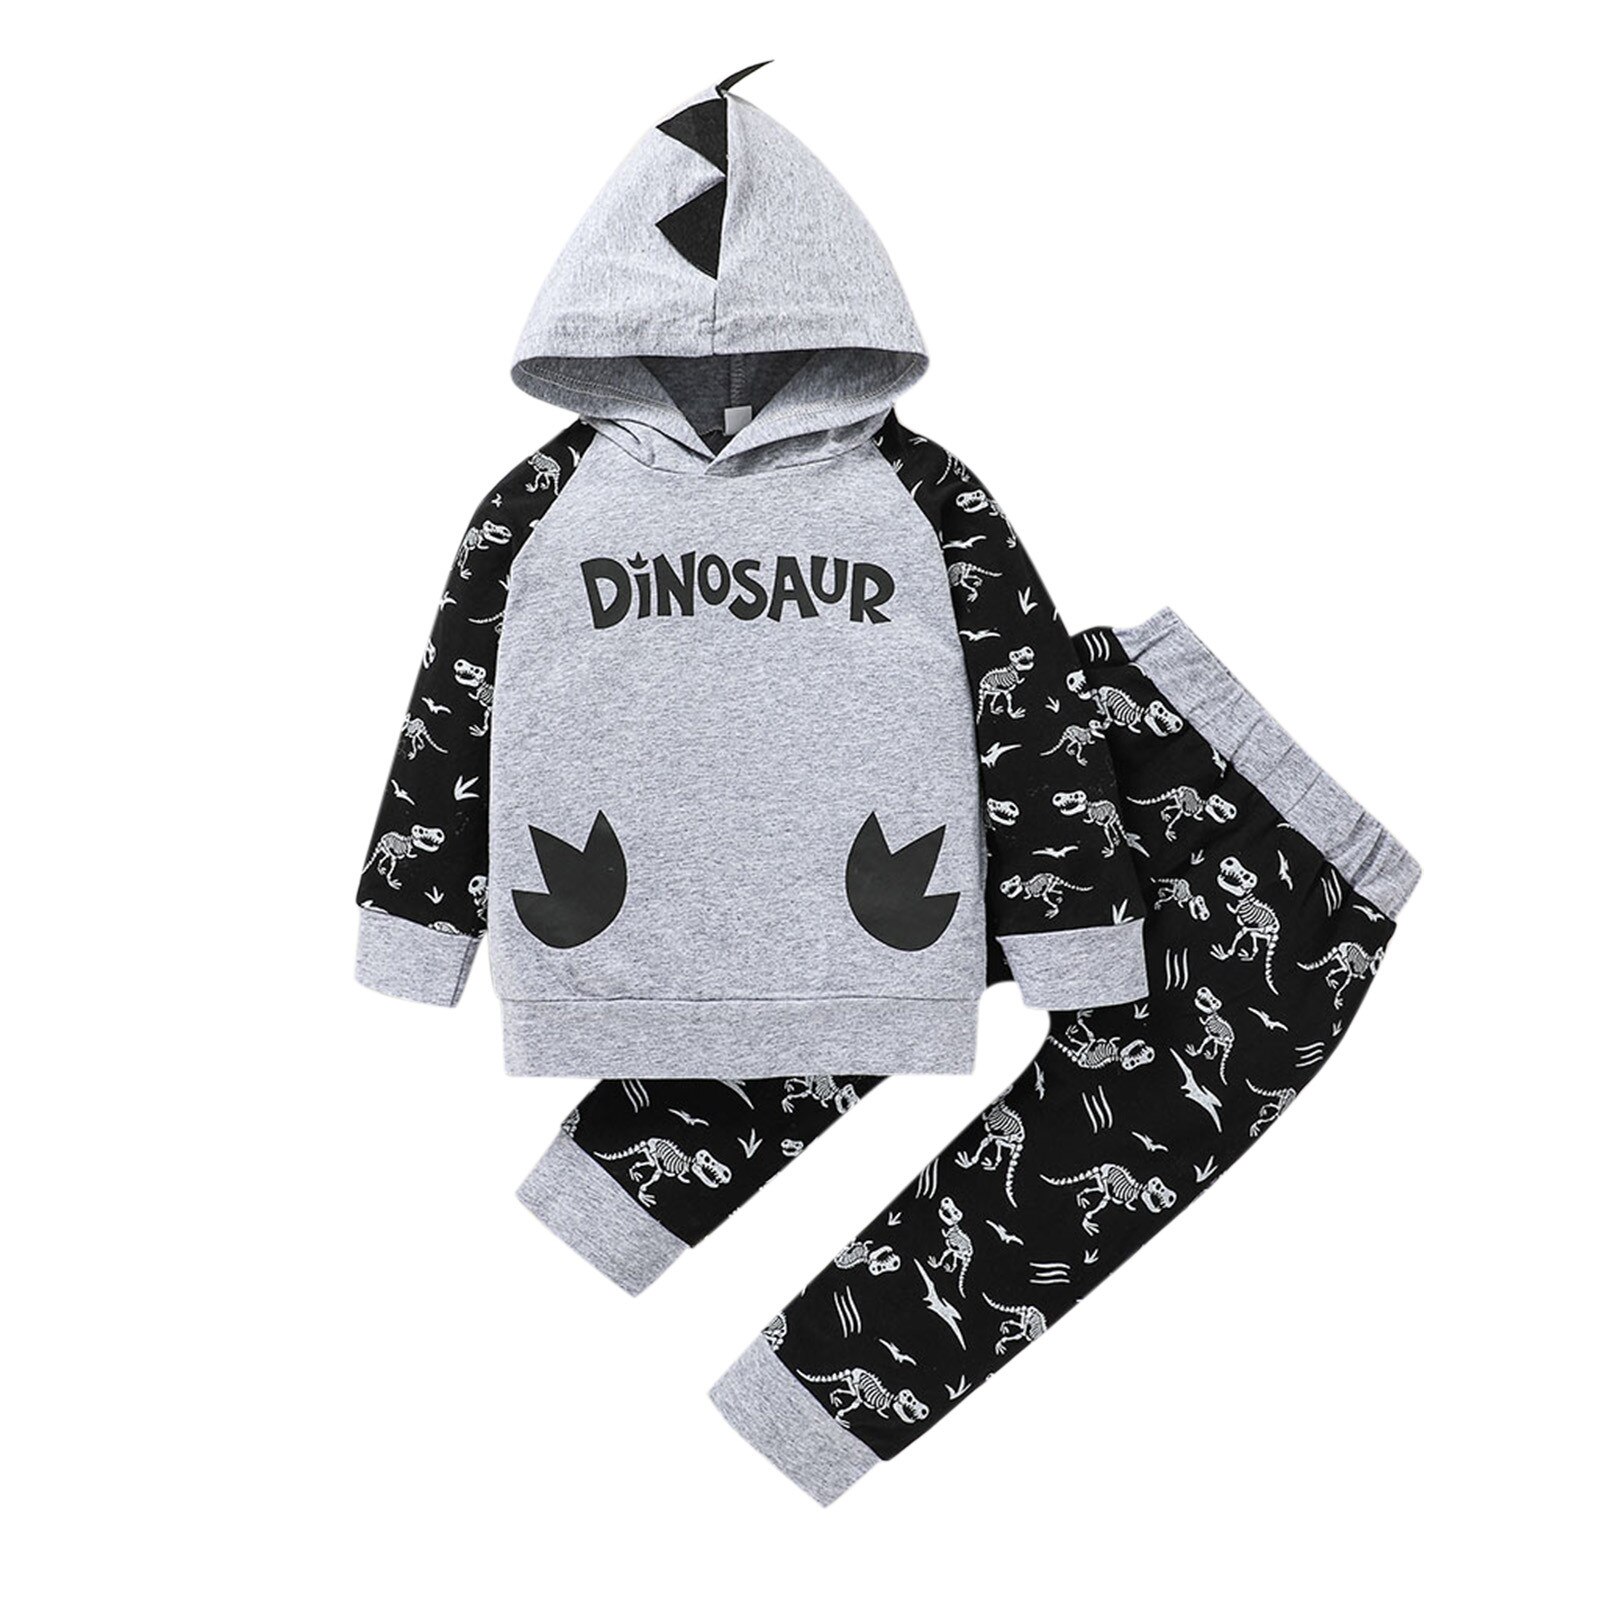 Toddler-Baby-Boys-Clothes-Dinosaur-Hooded-Sweatshirt-Pants-Winter-Kids-Outfit-Tracksuit-Child-Boy-Clothing-Set-2